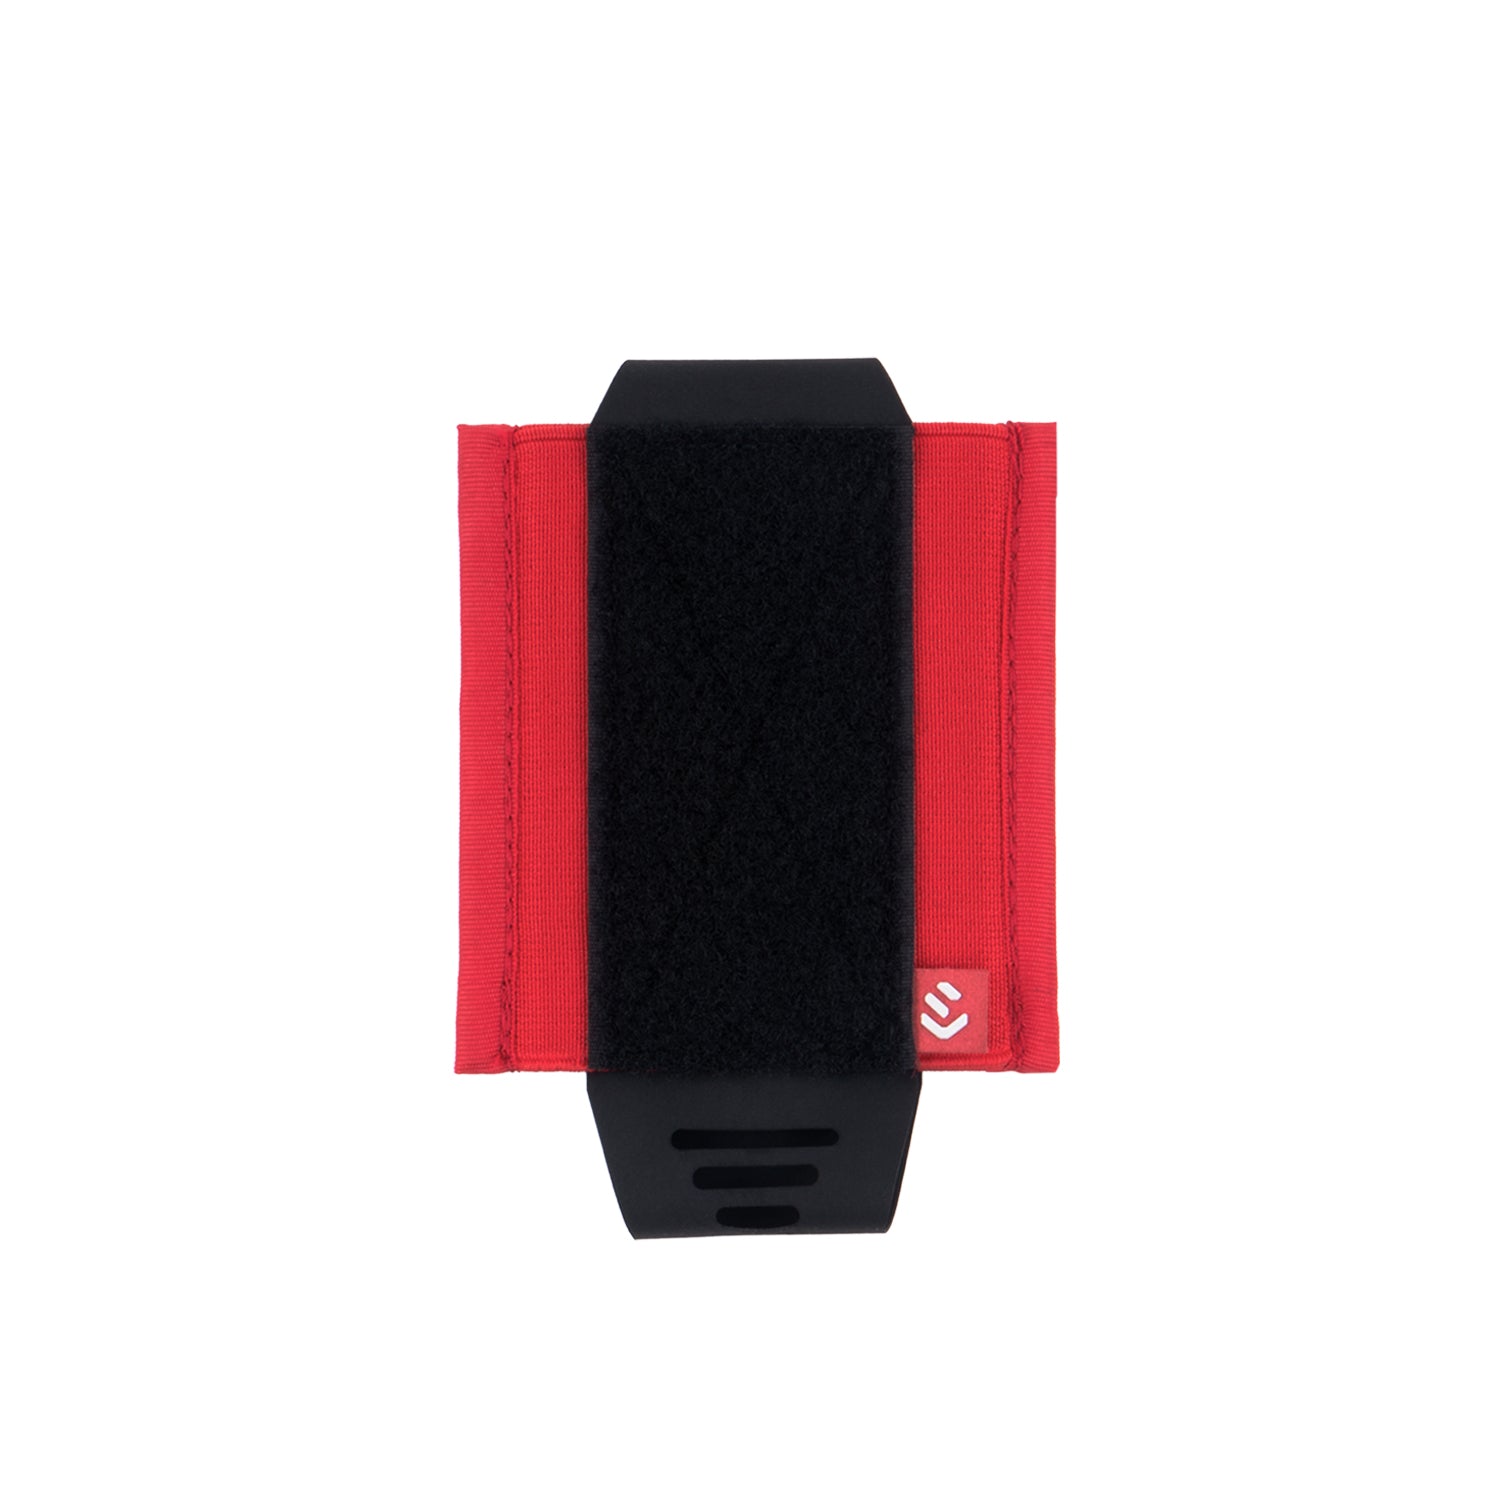 PROTON MAG POUCH INSERT - RIFLE [SINGLE] - RED